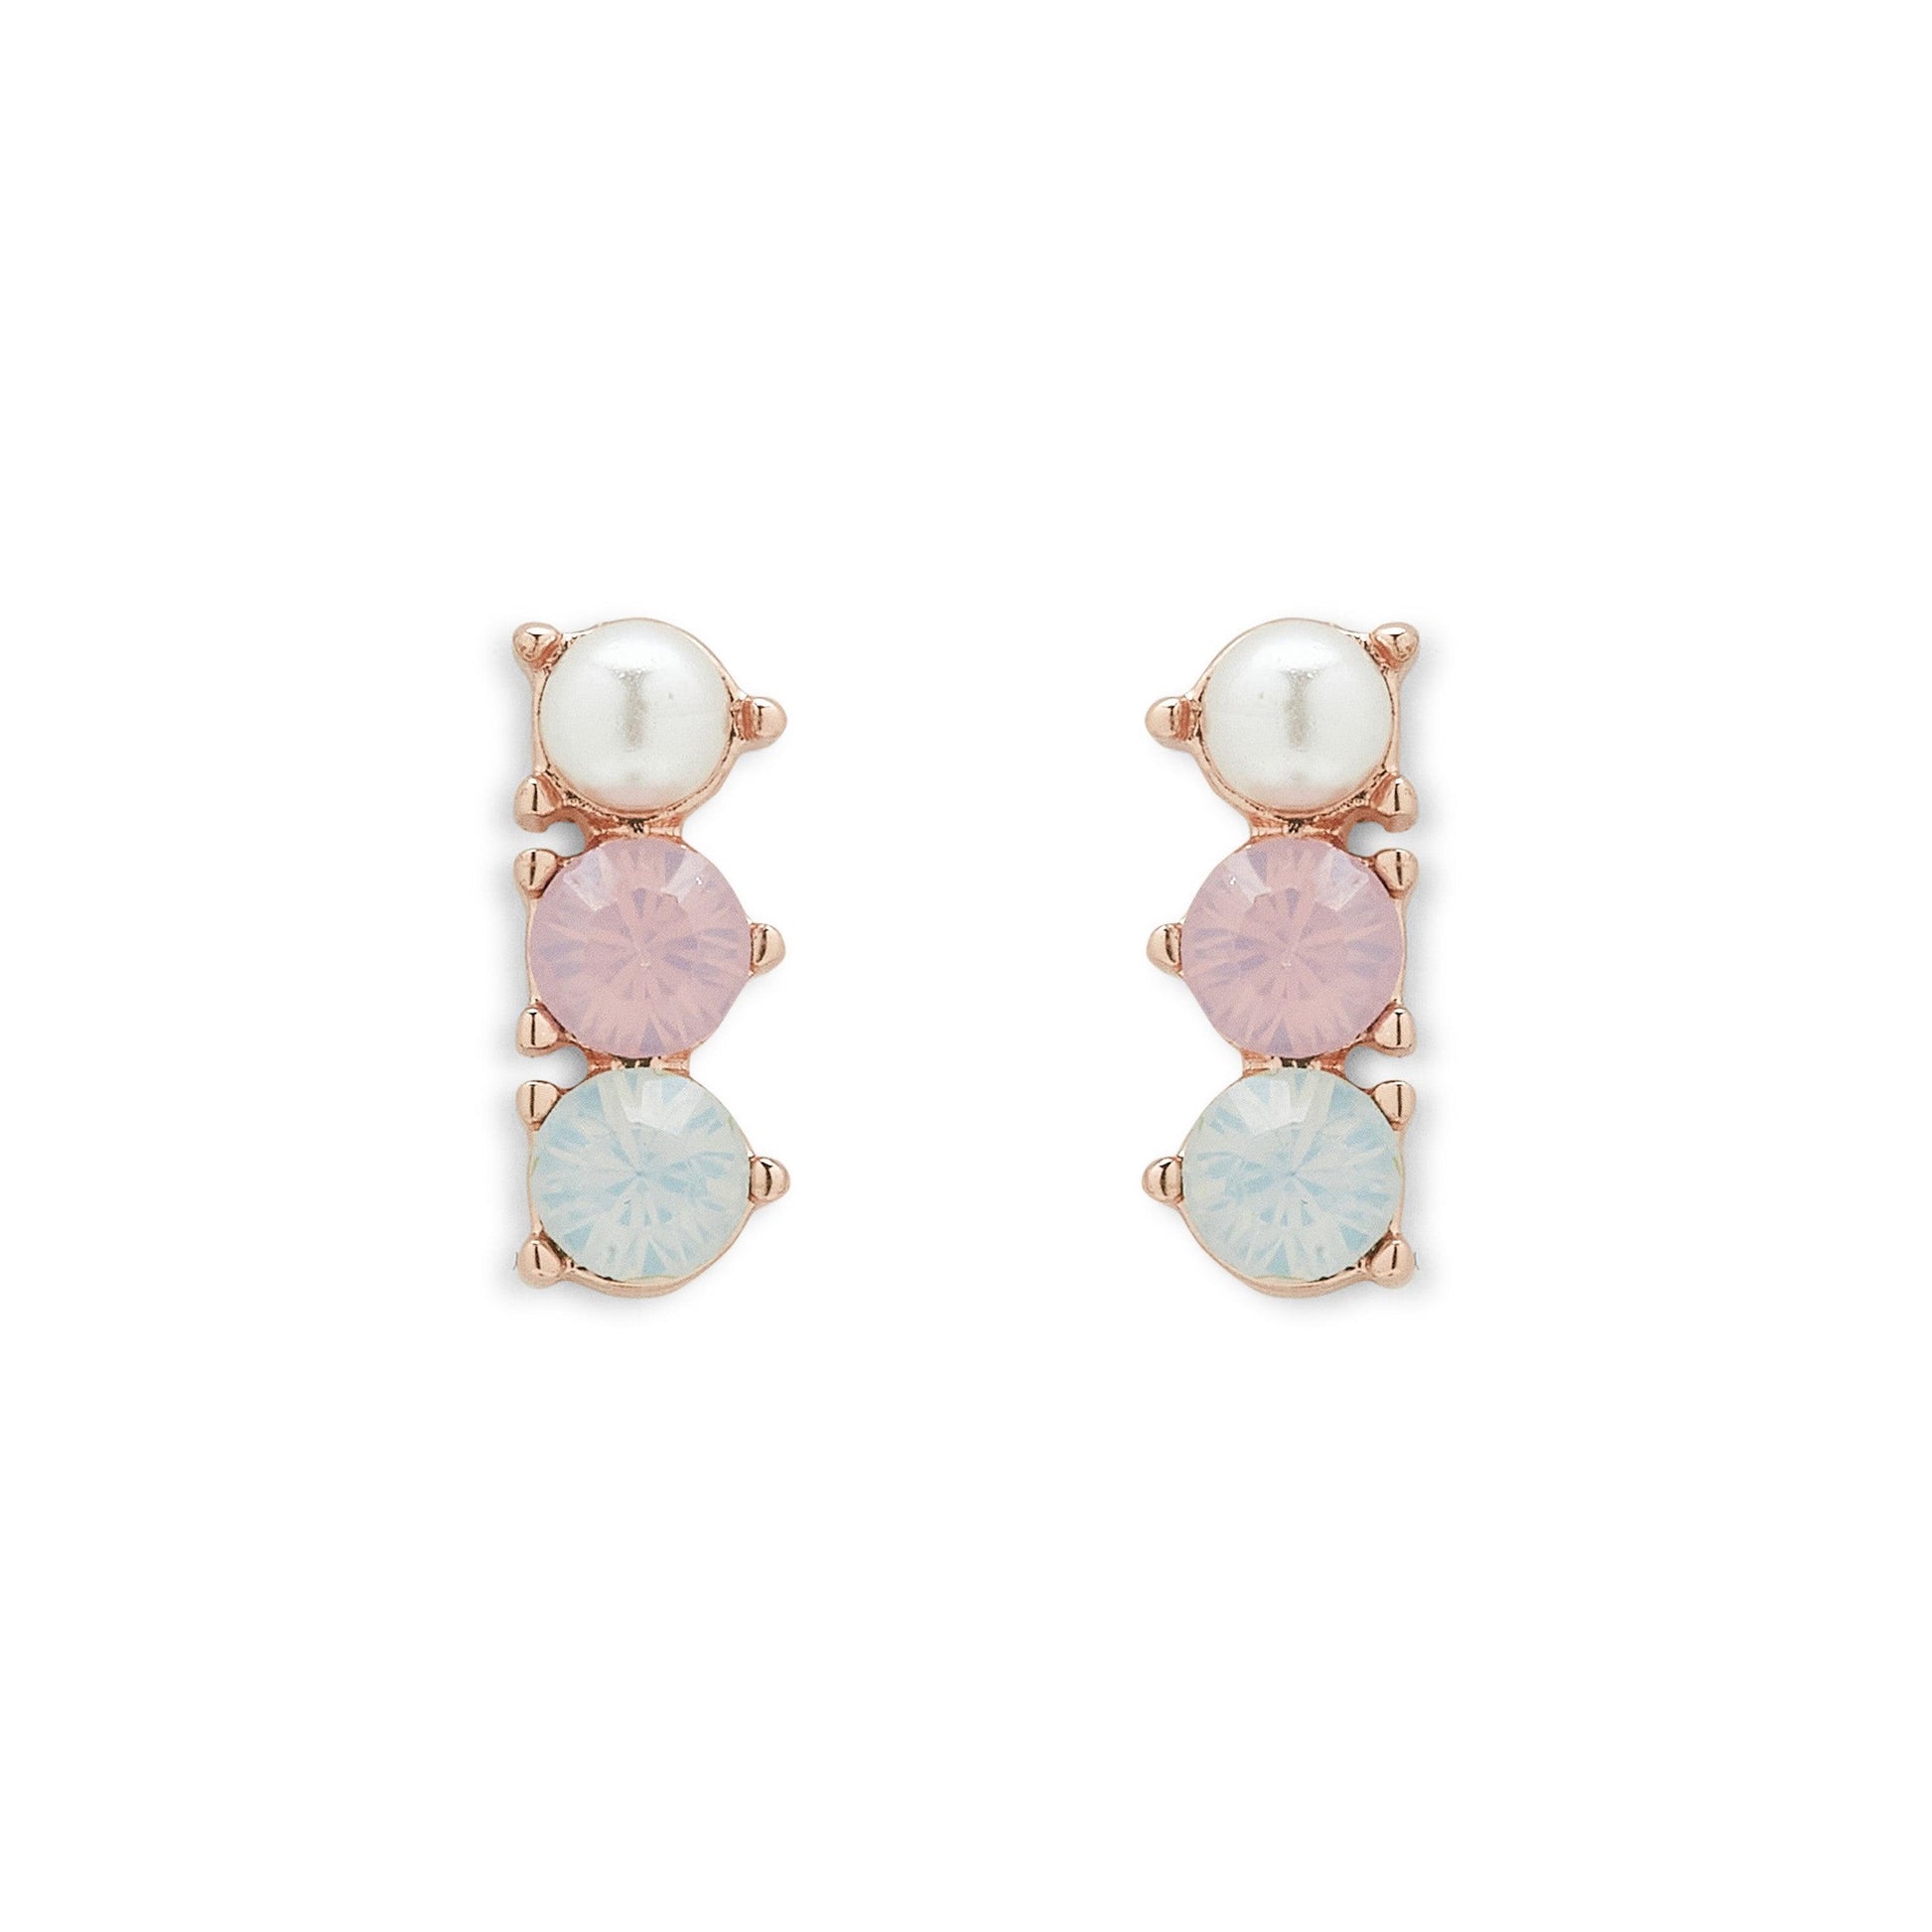 Puravida Earring Collection 3 - The Salty Mare